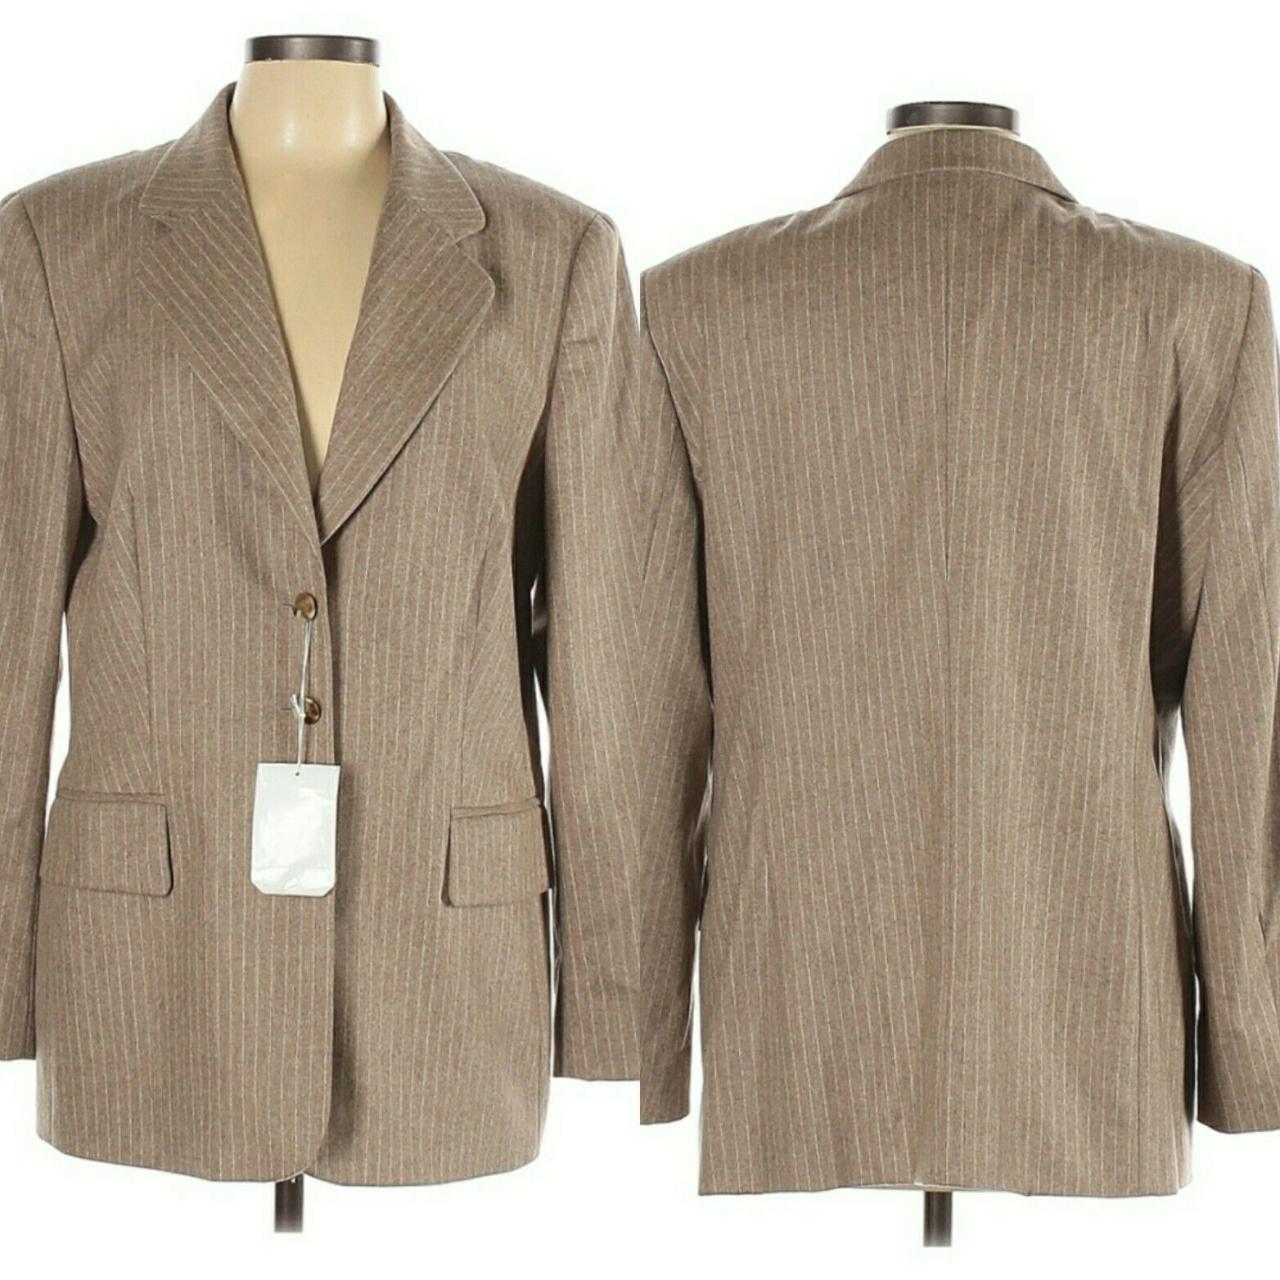 Women's Brown and Tan Suit